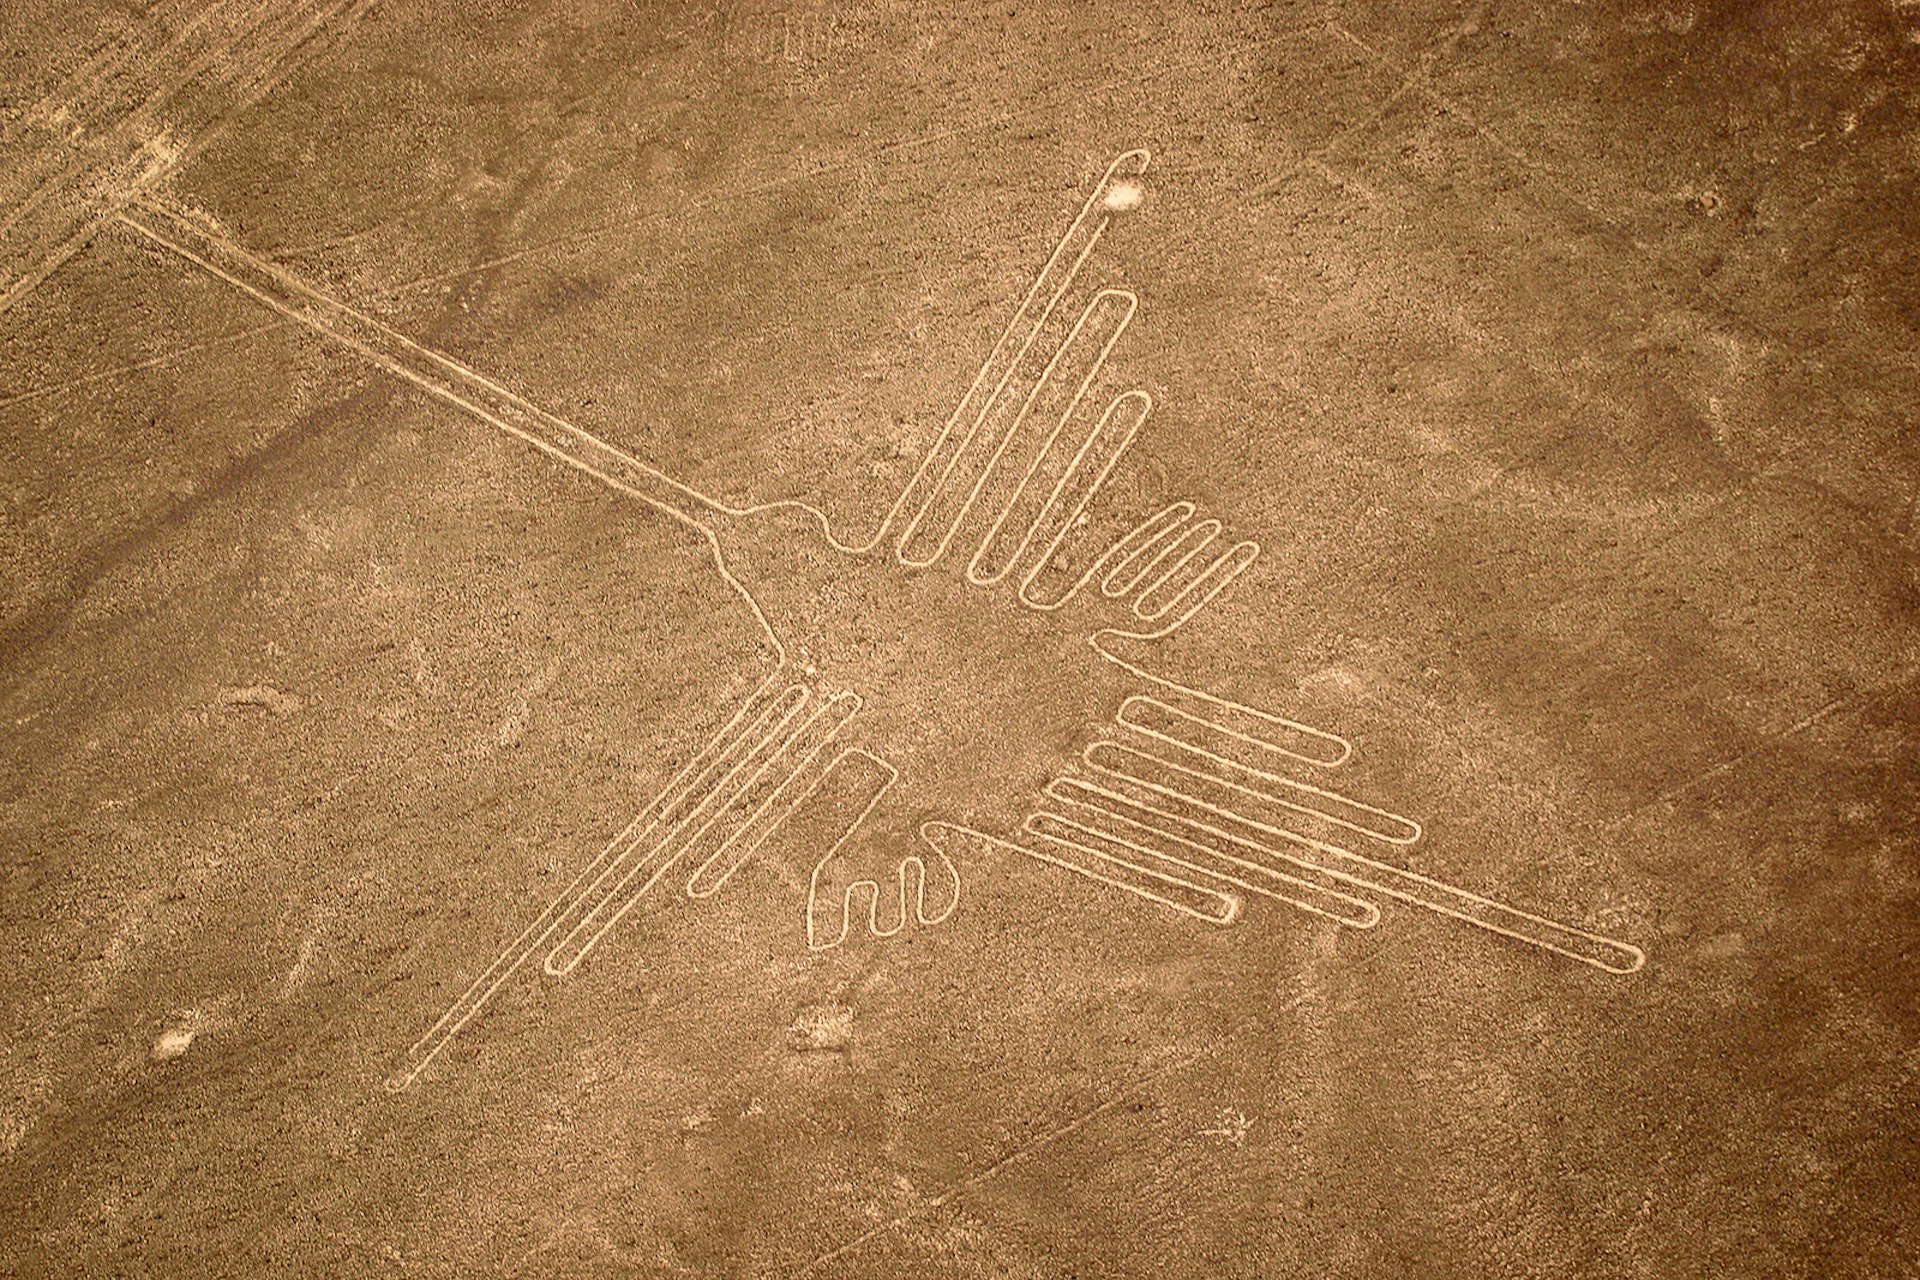 An aerial shot of a hummingbird carved into red dirt near Nazca